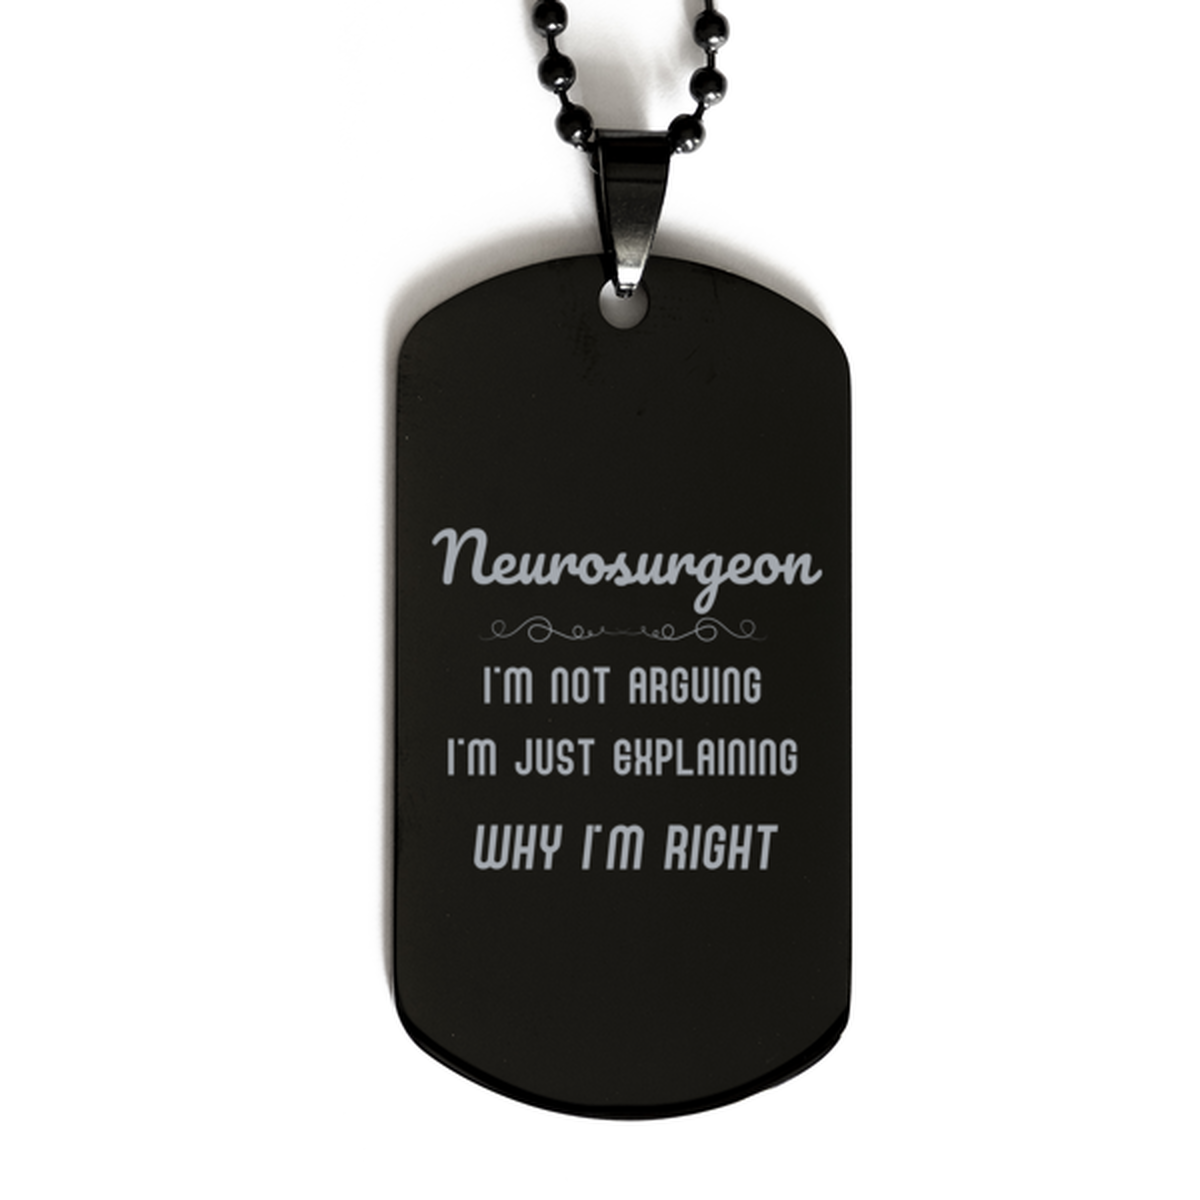 Neurosurgeon I'm not Arguing. I'm Just Explaining Why I'm RIGHT Black Dog Tag, Funny Saying Quote Neurosurgeon Gifts For Neurosurgeon Graduation Birthday Christmas Gifts for Men Women Coworker